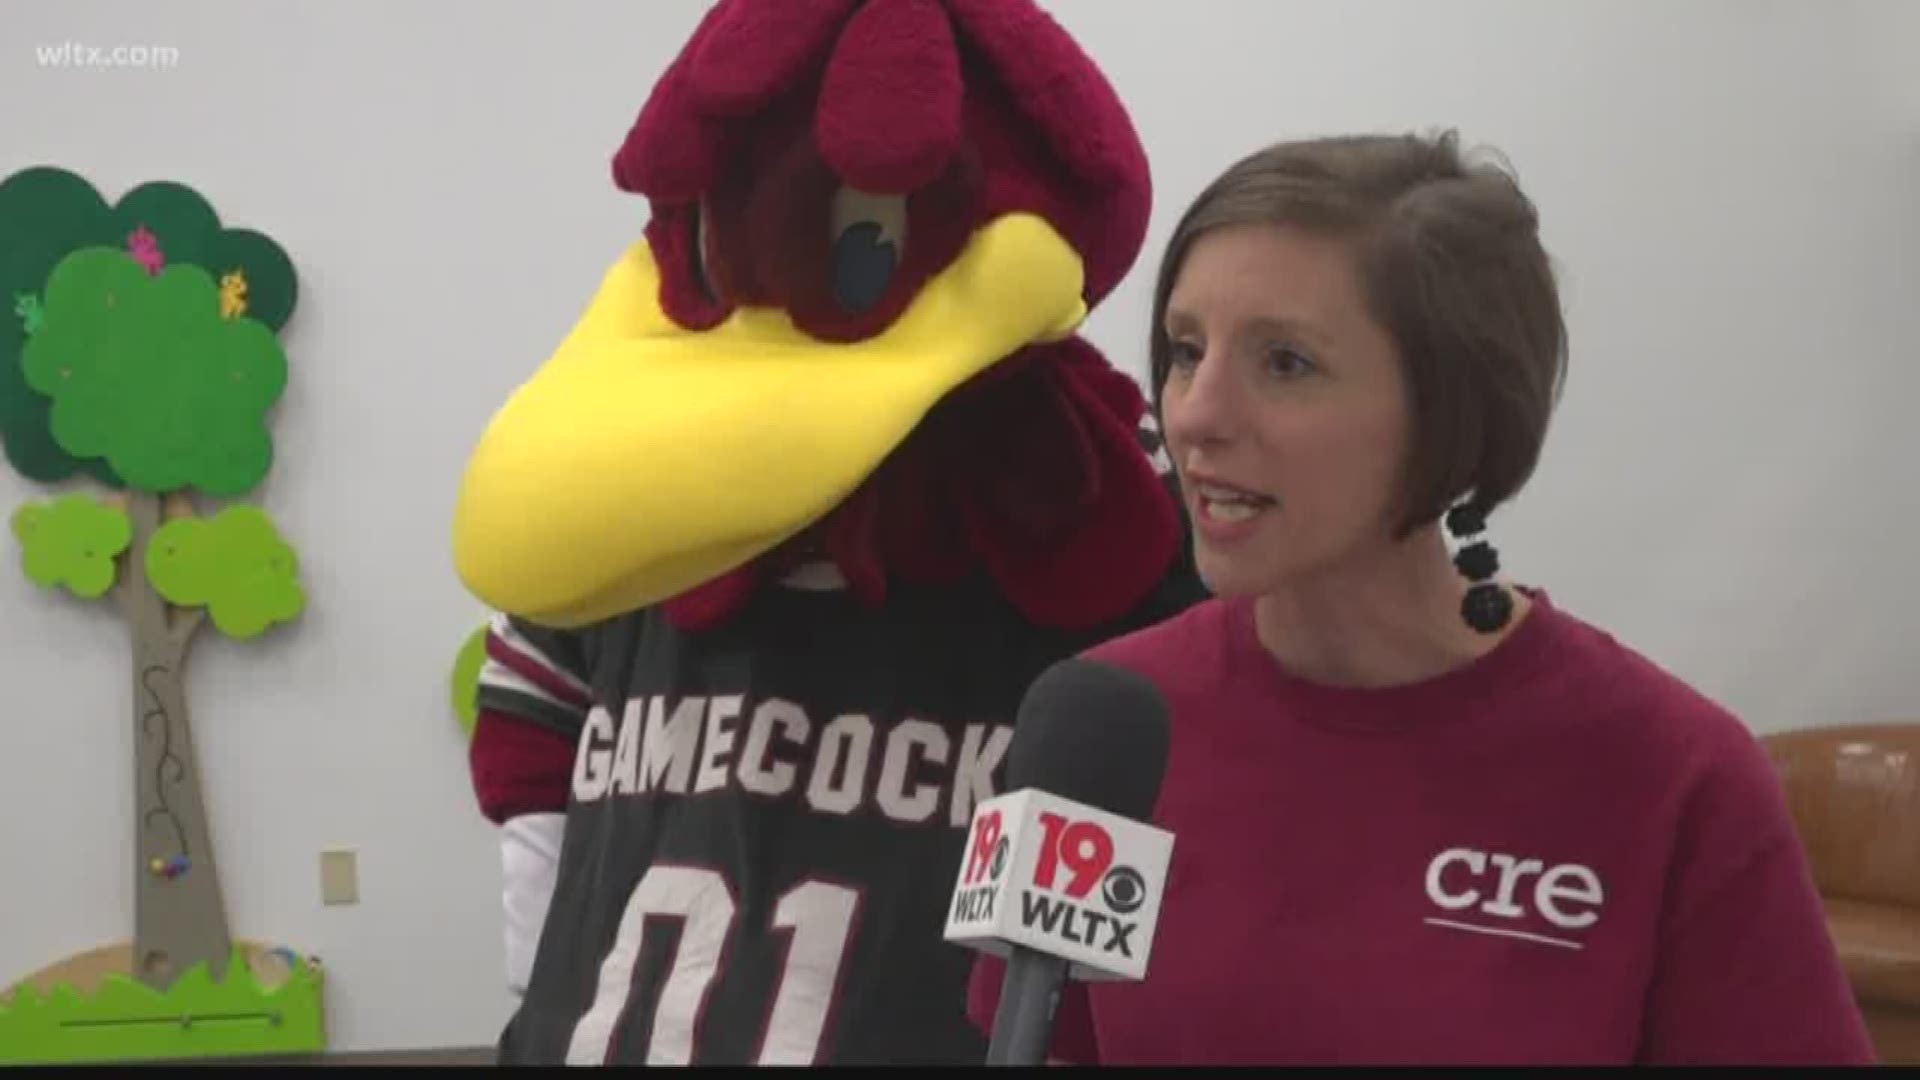 Cocky's reading express is the University of South Carolina's literacy outreach program. They travel the state of South Carolina and visit Title One schools, the primary audience is pre-k through second graders.